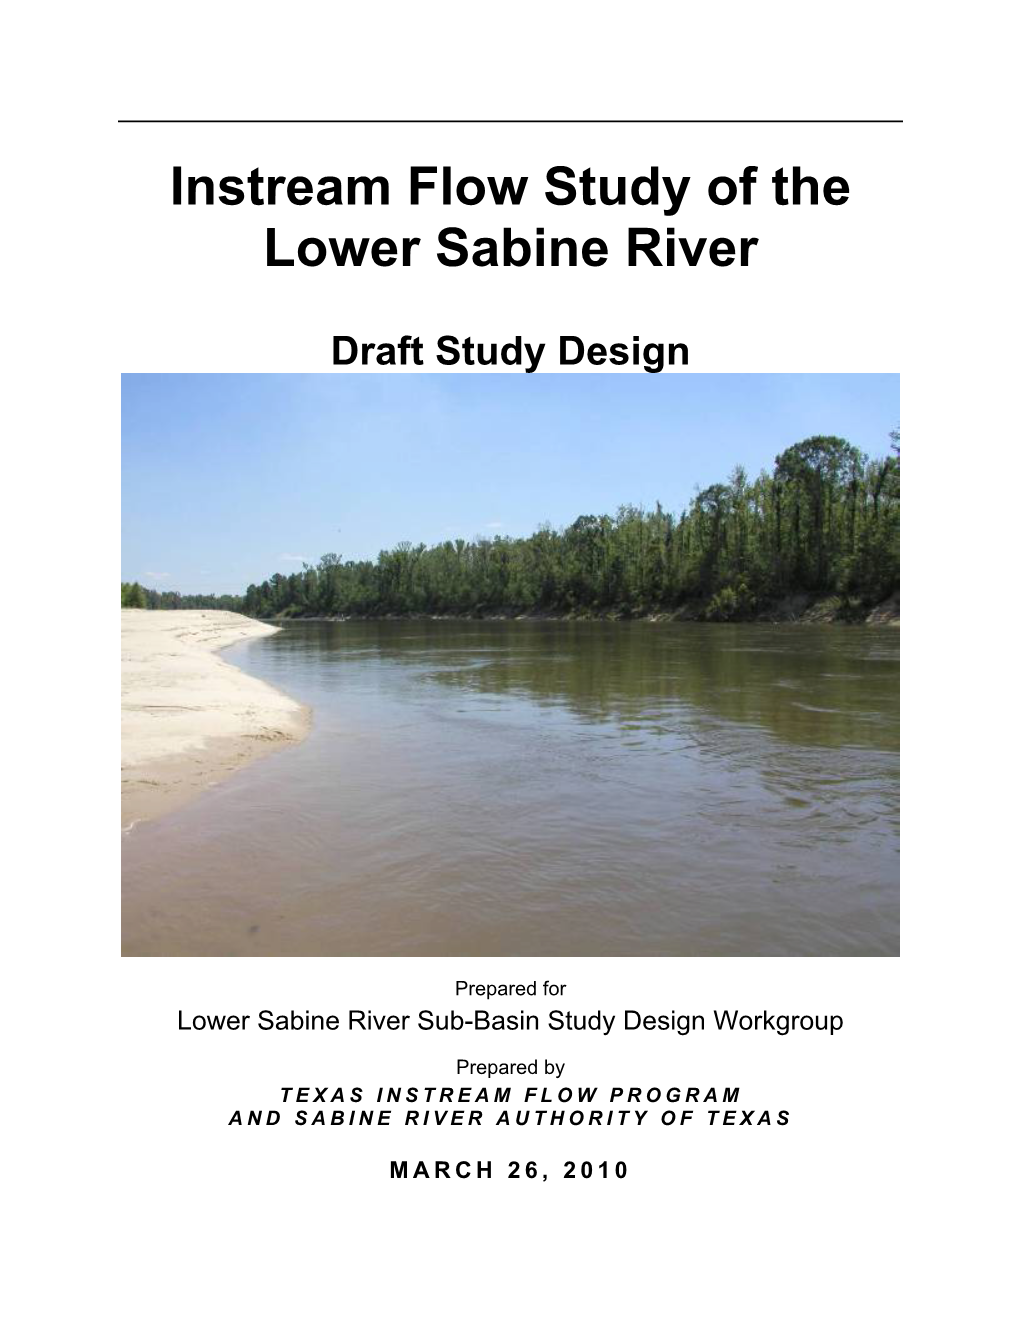 Instream Flow Study of the Lower Sabine River